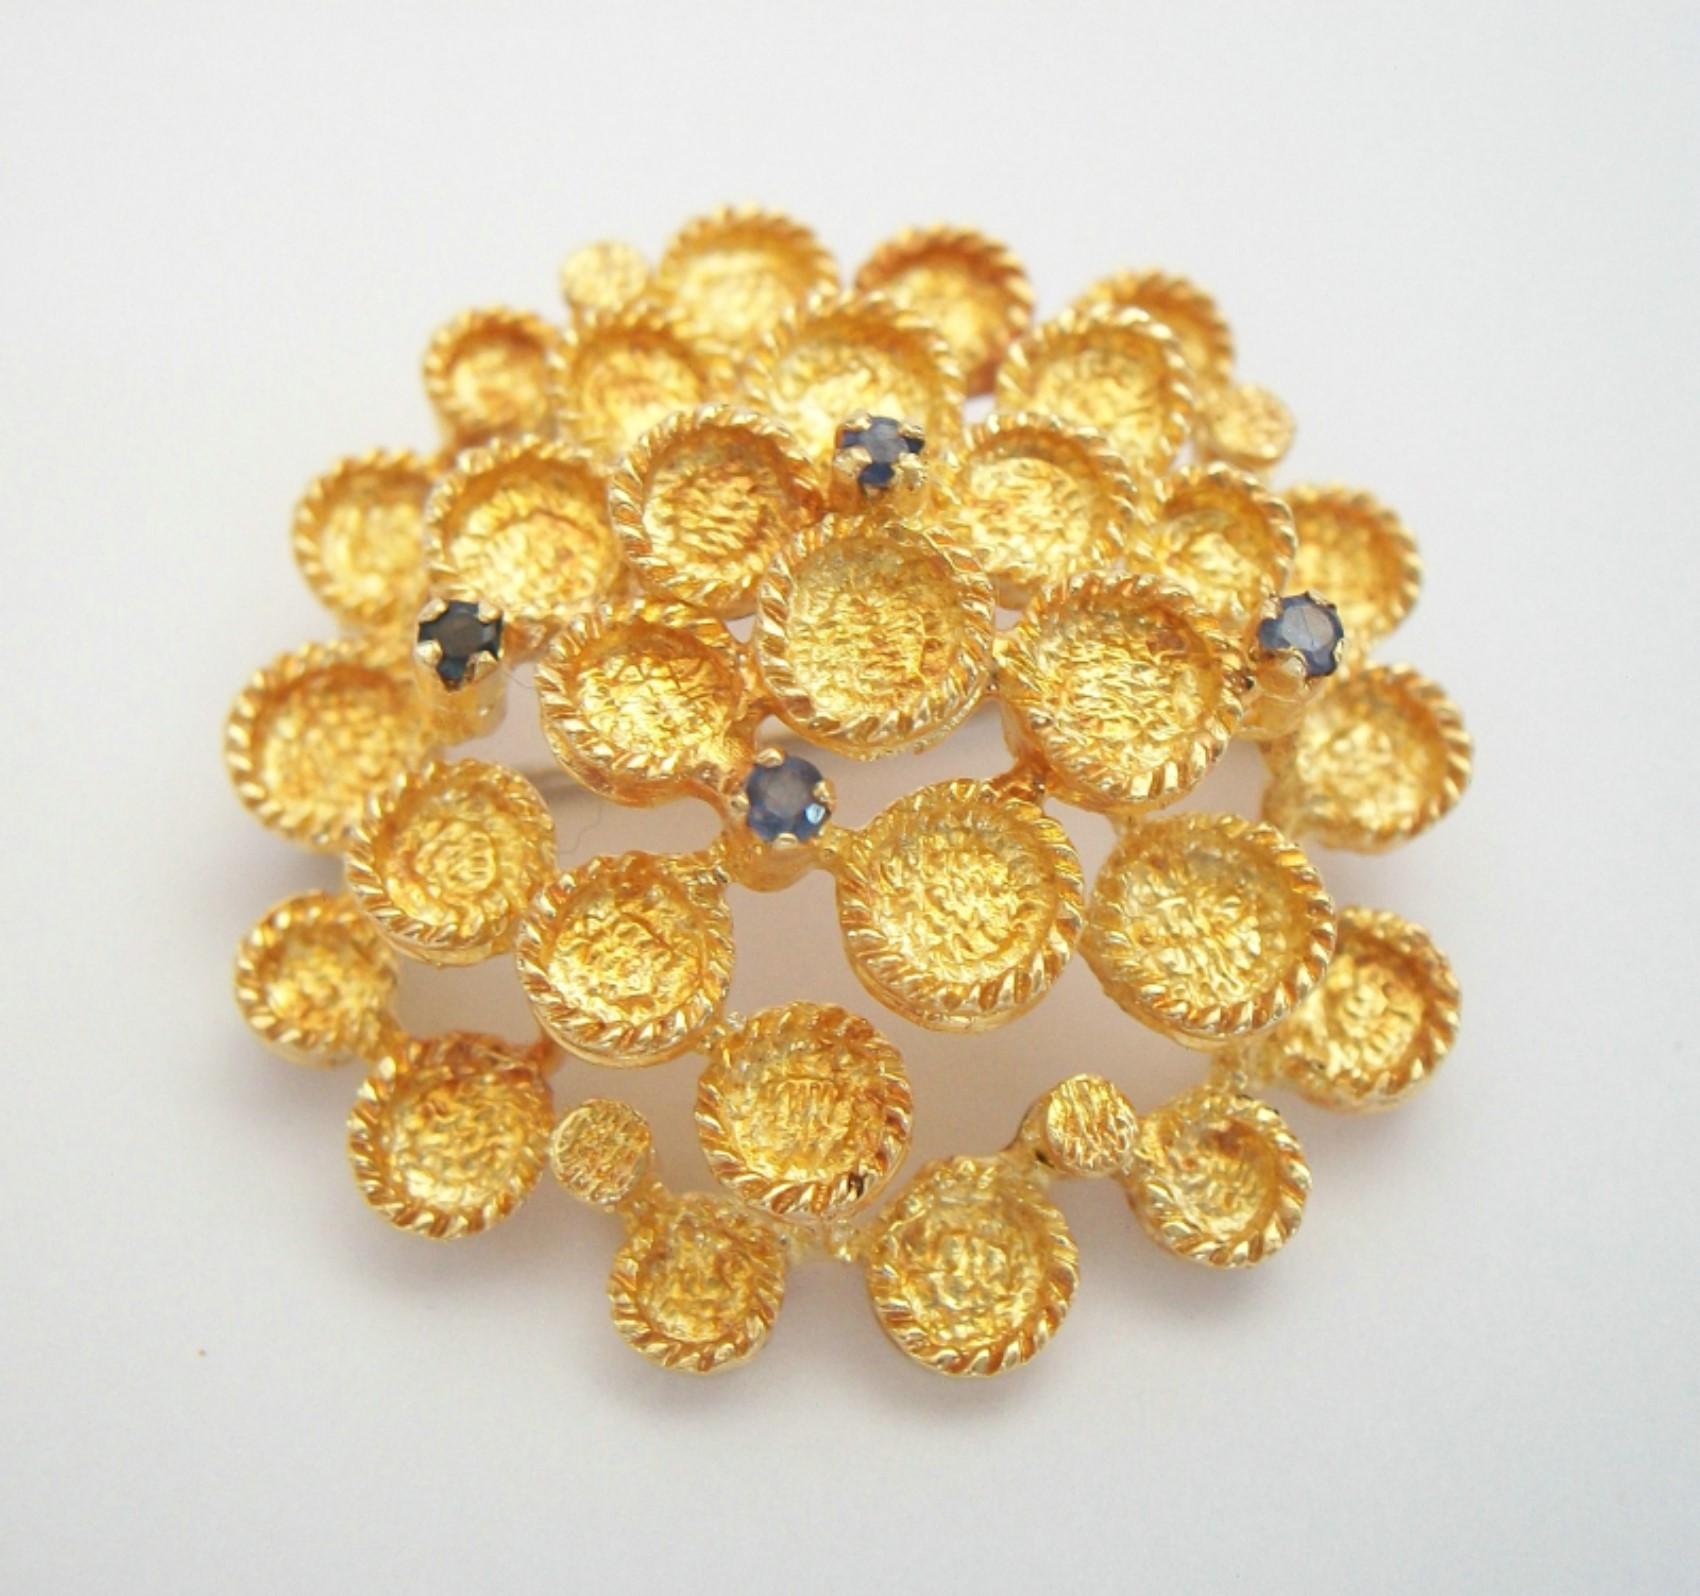 Modernist 18K (.750) yellow gold brooch with four sapphires (each gemstone round faceted - claw set - approx. 1 mm. diameter - approx. 0.07 carat weight total) - hand made featuring fine and elaborate textured finish - original safety catch and pin